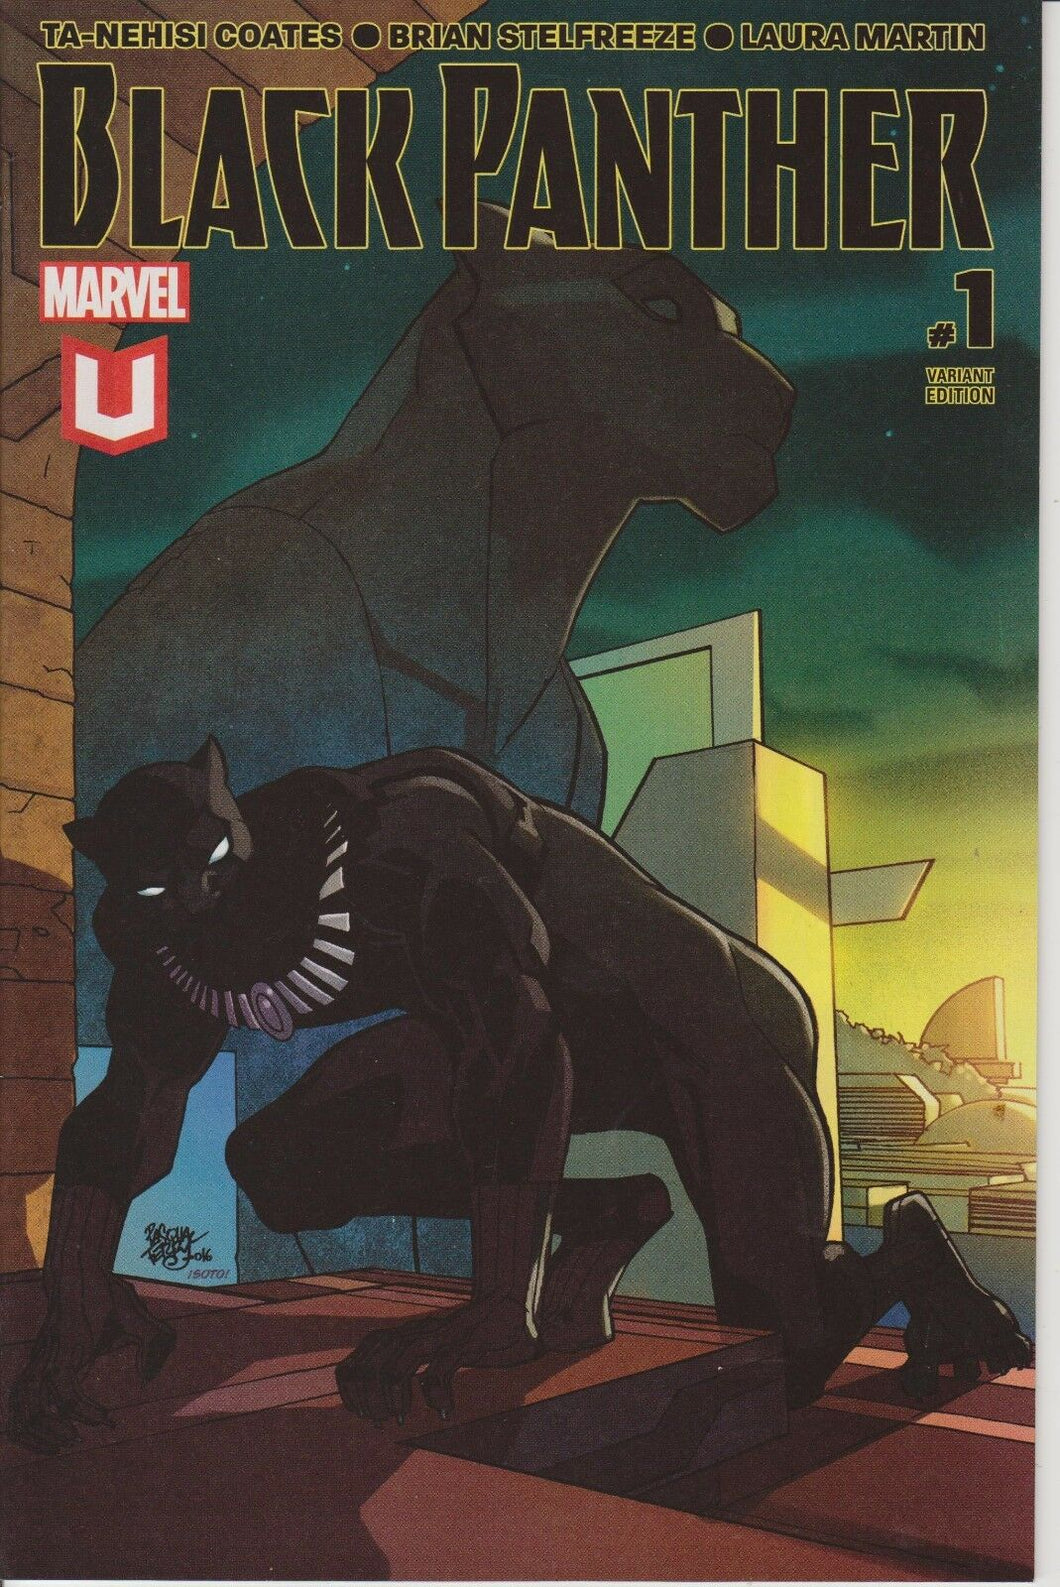 Black Panther #1 Pasquel Ferry Marvel Unlimited Plus VIP Exclusive Variant Edition Cover